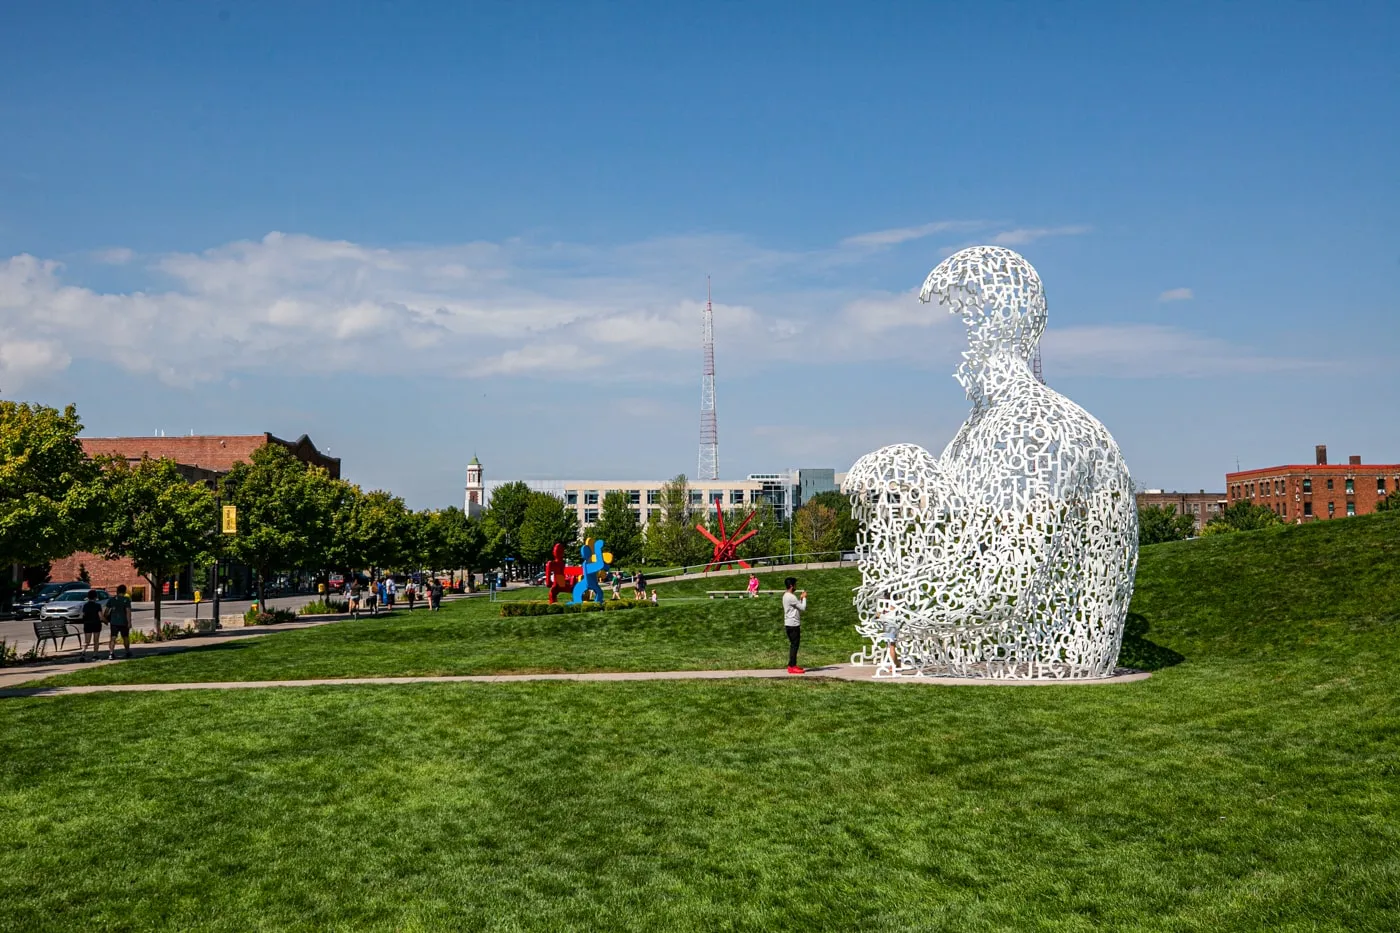 Nomade by artist Jaume Plensa | Figure made from white letters | Pappajohn Sculpture Park in Des Moines, Iowa